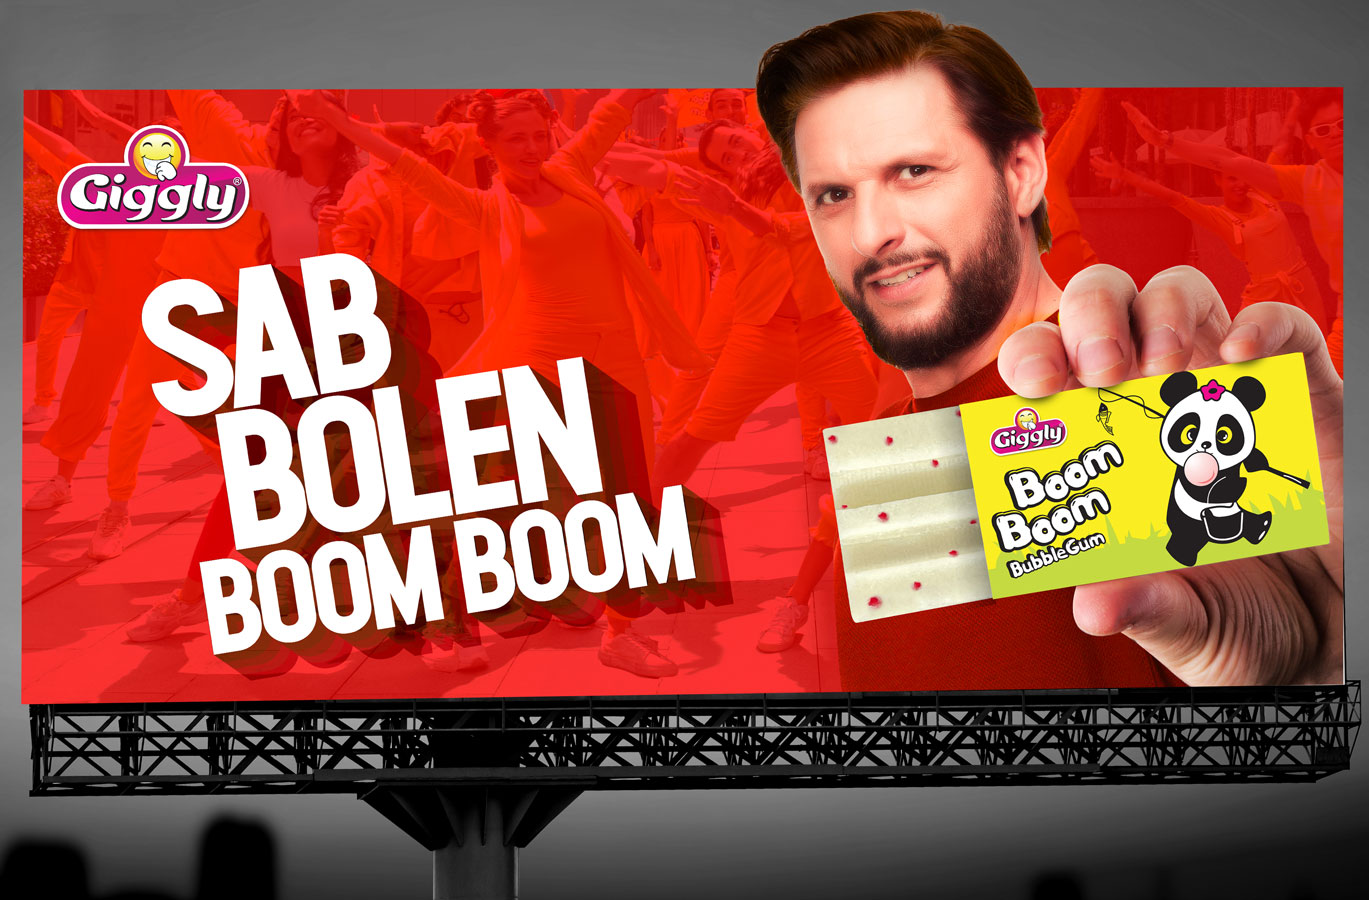 Boomboom Twisto Giggly Pakistan Shahid Afridi Advertising campaign for website billboards